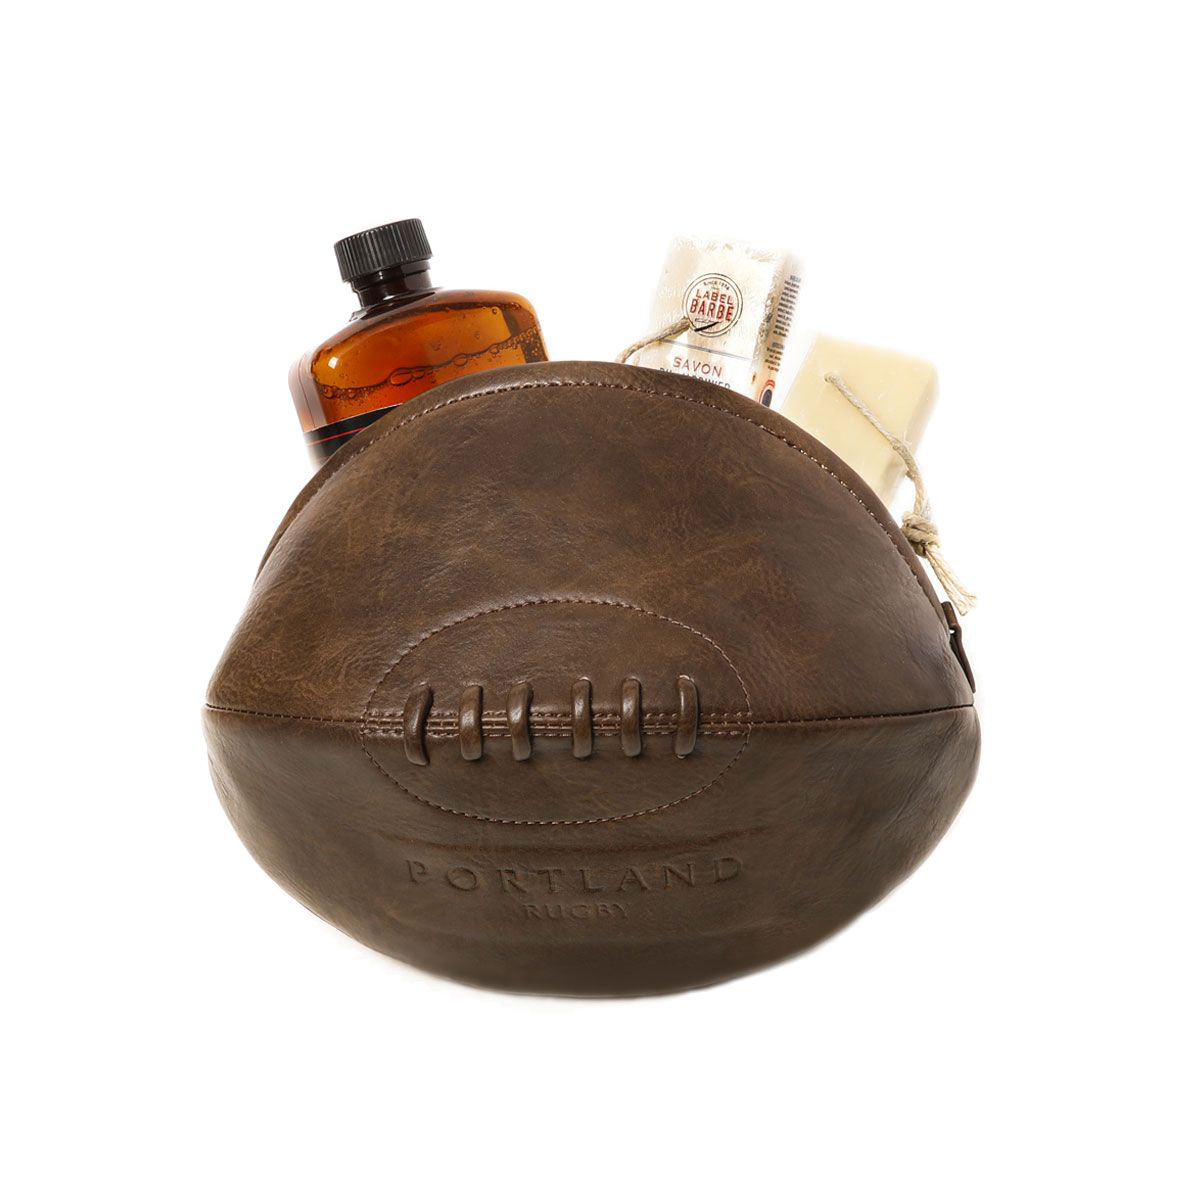 Retro rugby ball toiletry bag